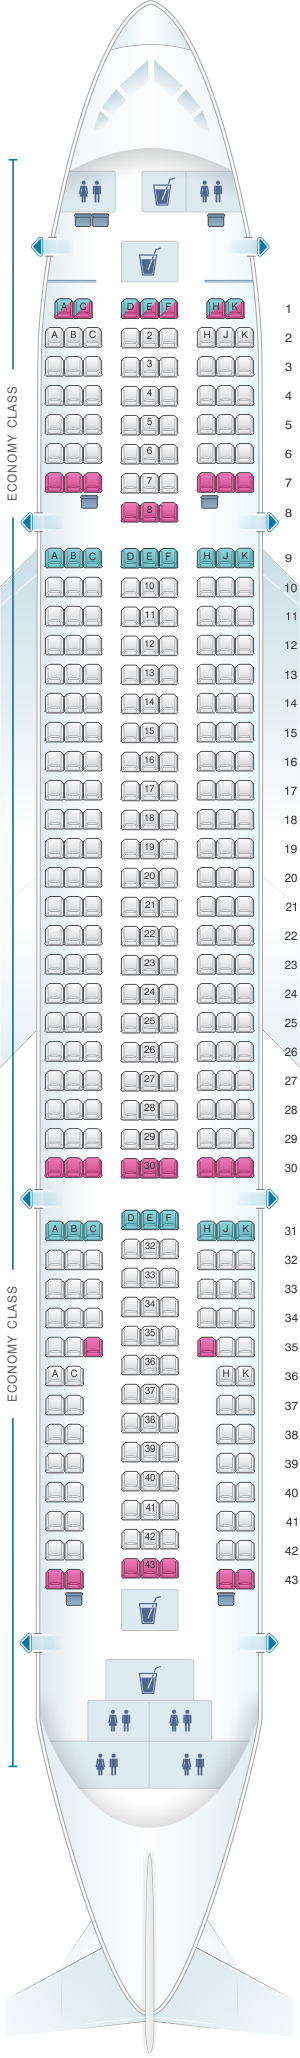 Seat map for Monarch Airlines Airbus A300 600